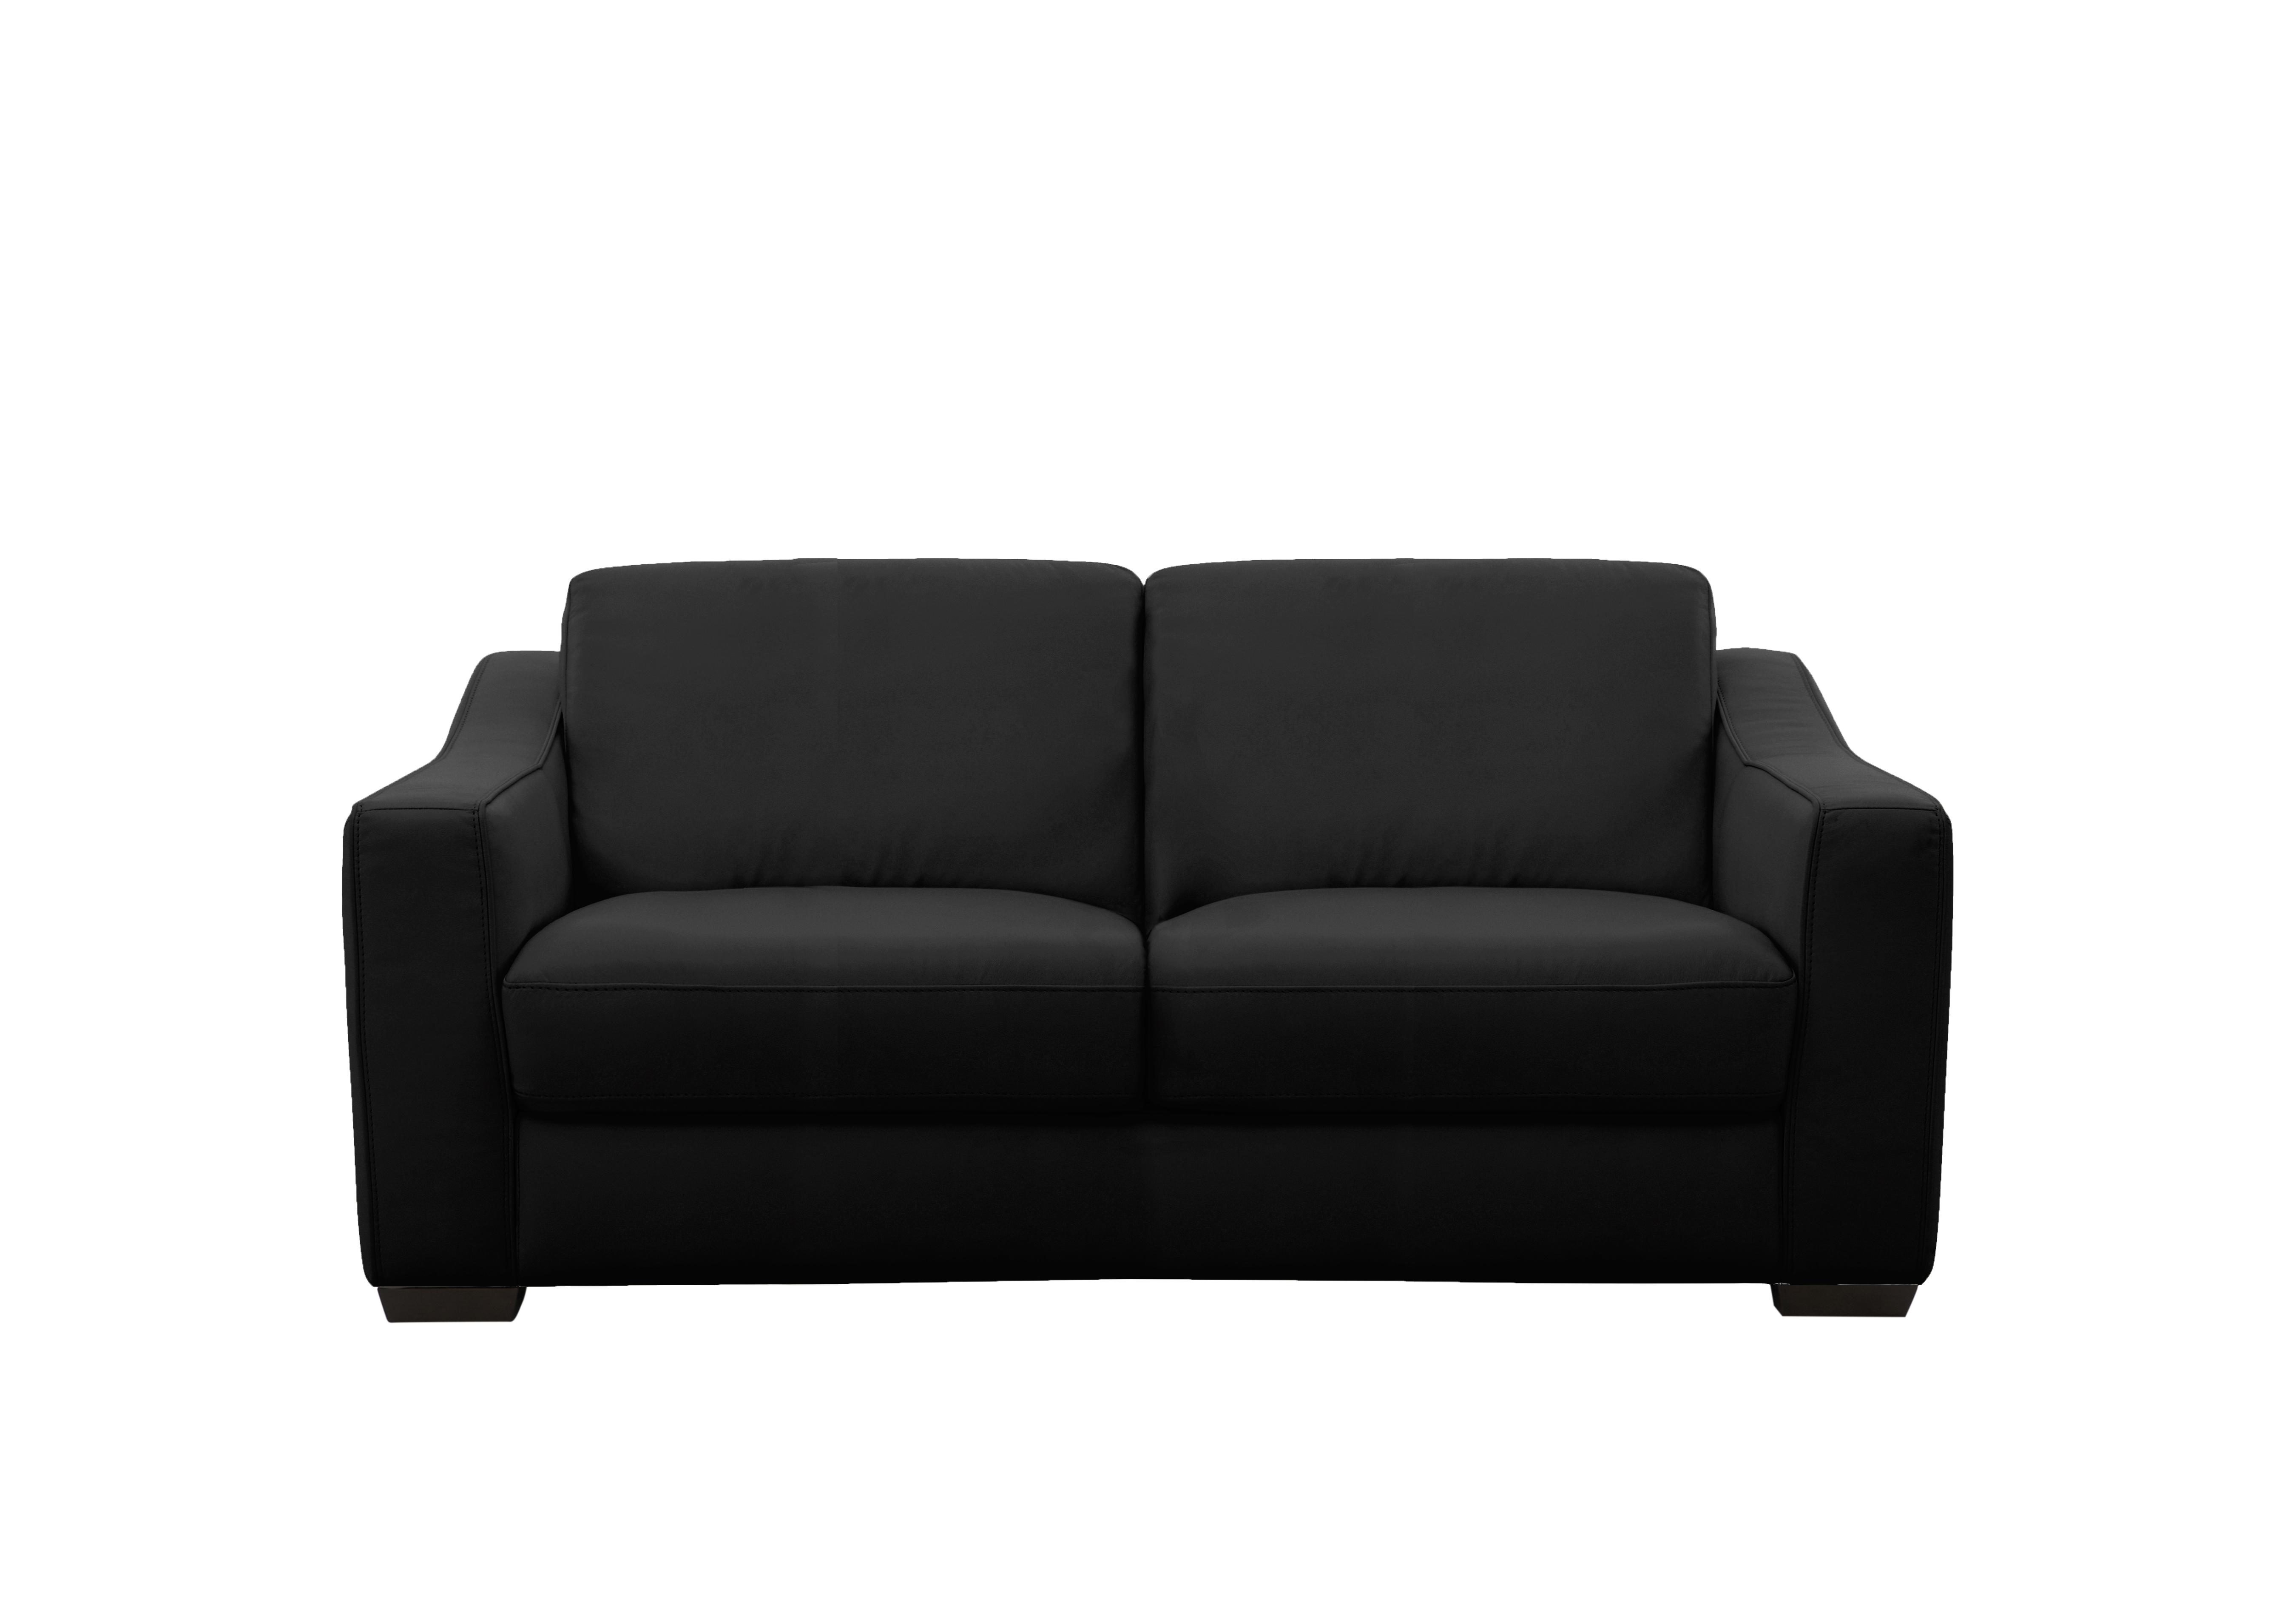 Optimus 2 Seater Leather Sofa in Bv-3500 Classic Black on Furniture Village